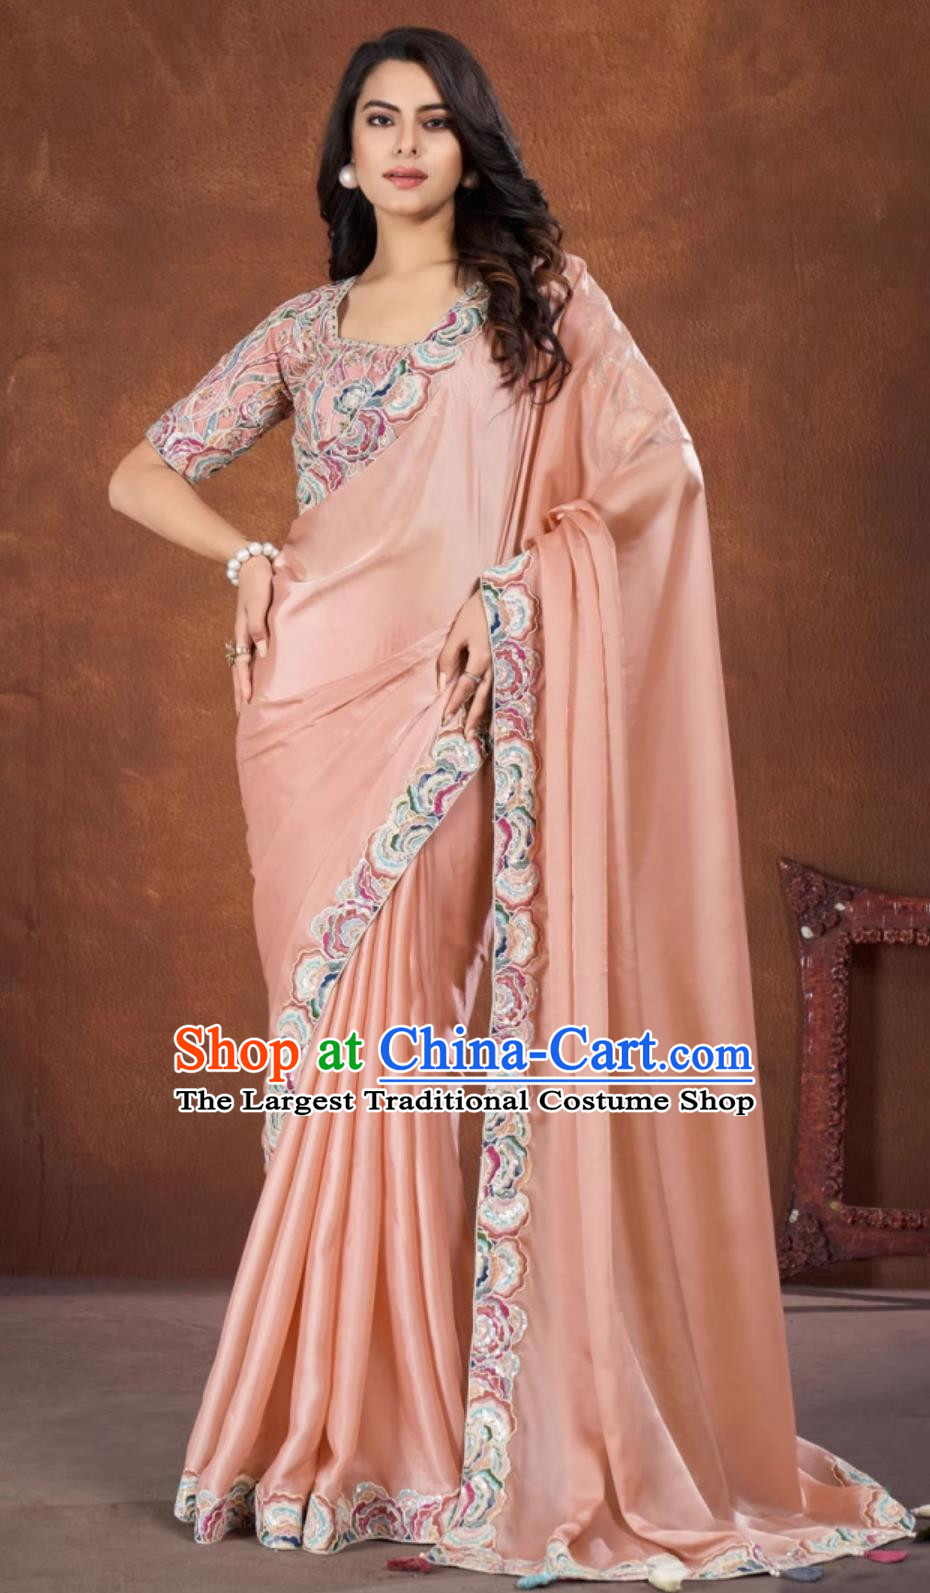 Pink Embroidered National Indian Saree With Diamonds Features Traditional Festival Party Women Wrap Skirt Sari